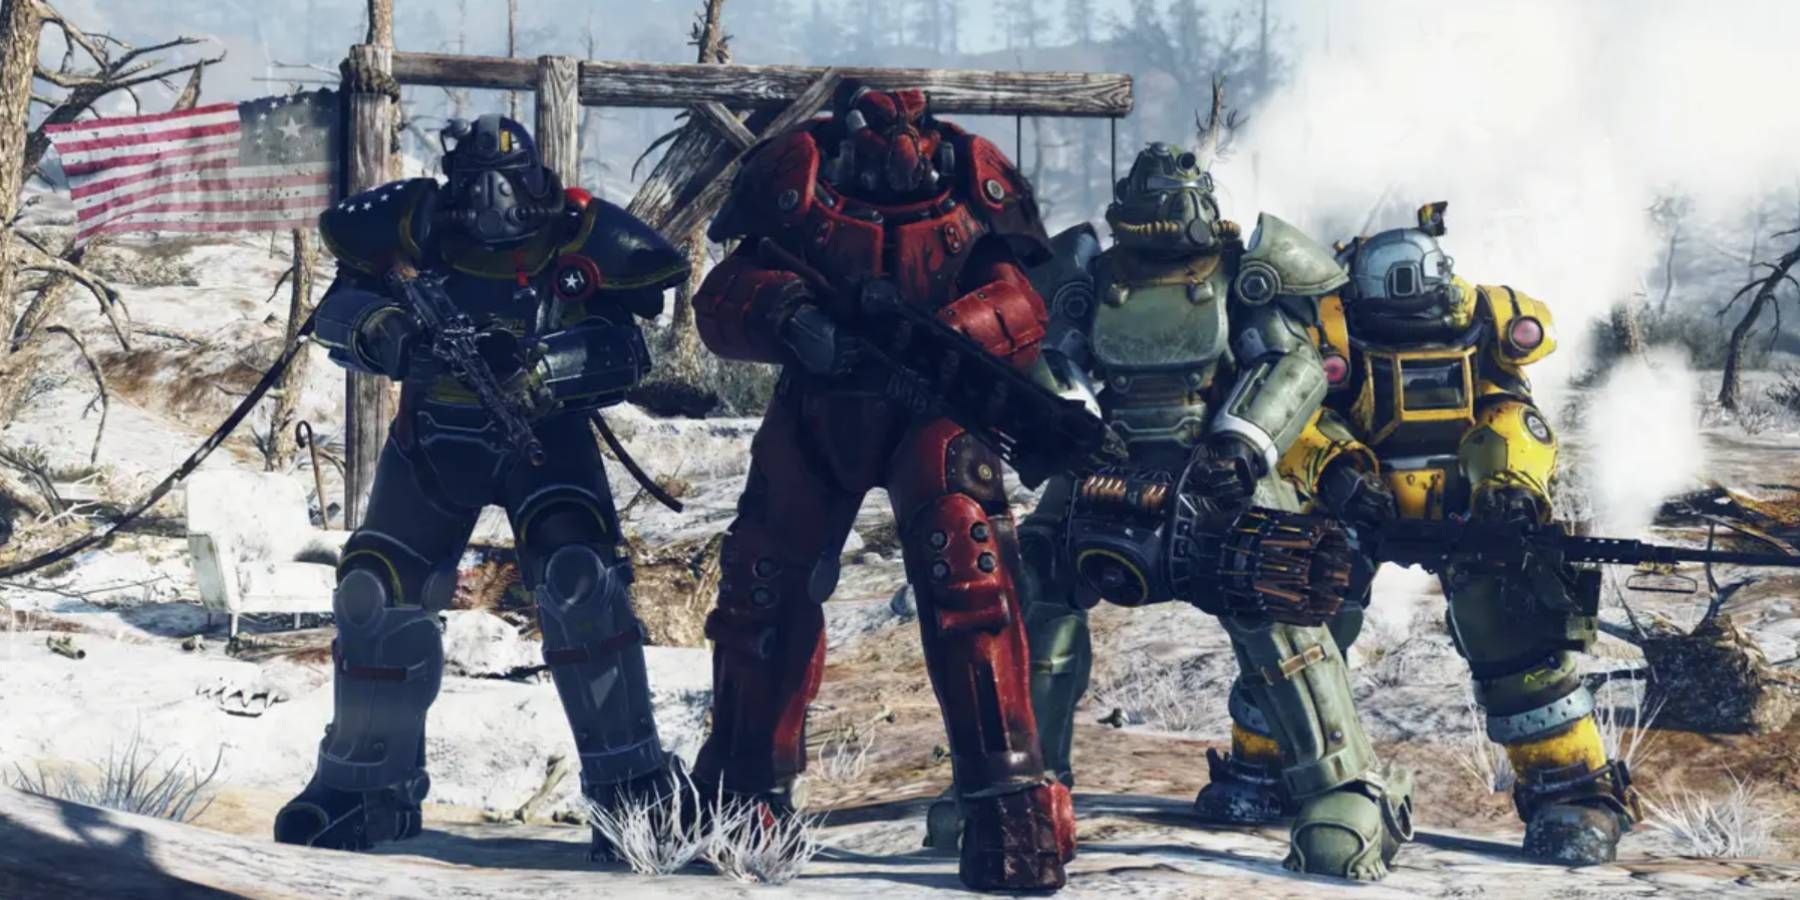 A group of characters wearing power armor in Fallout 76